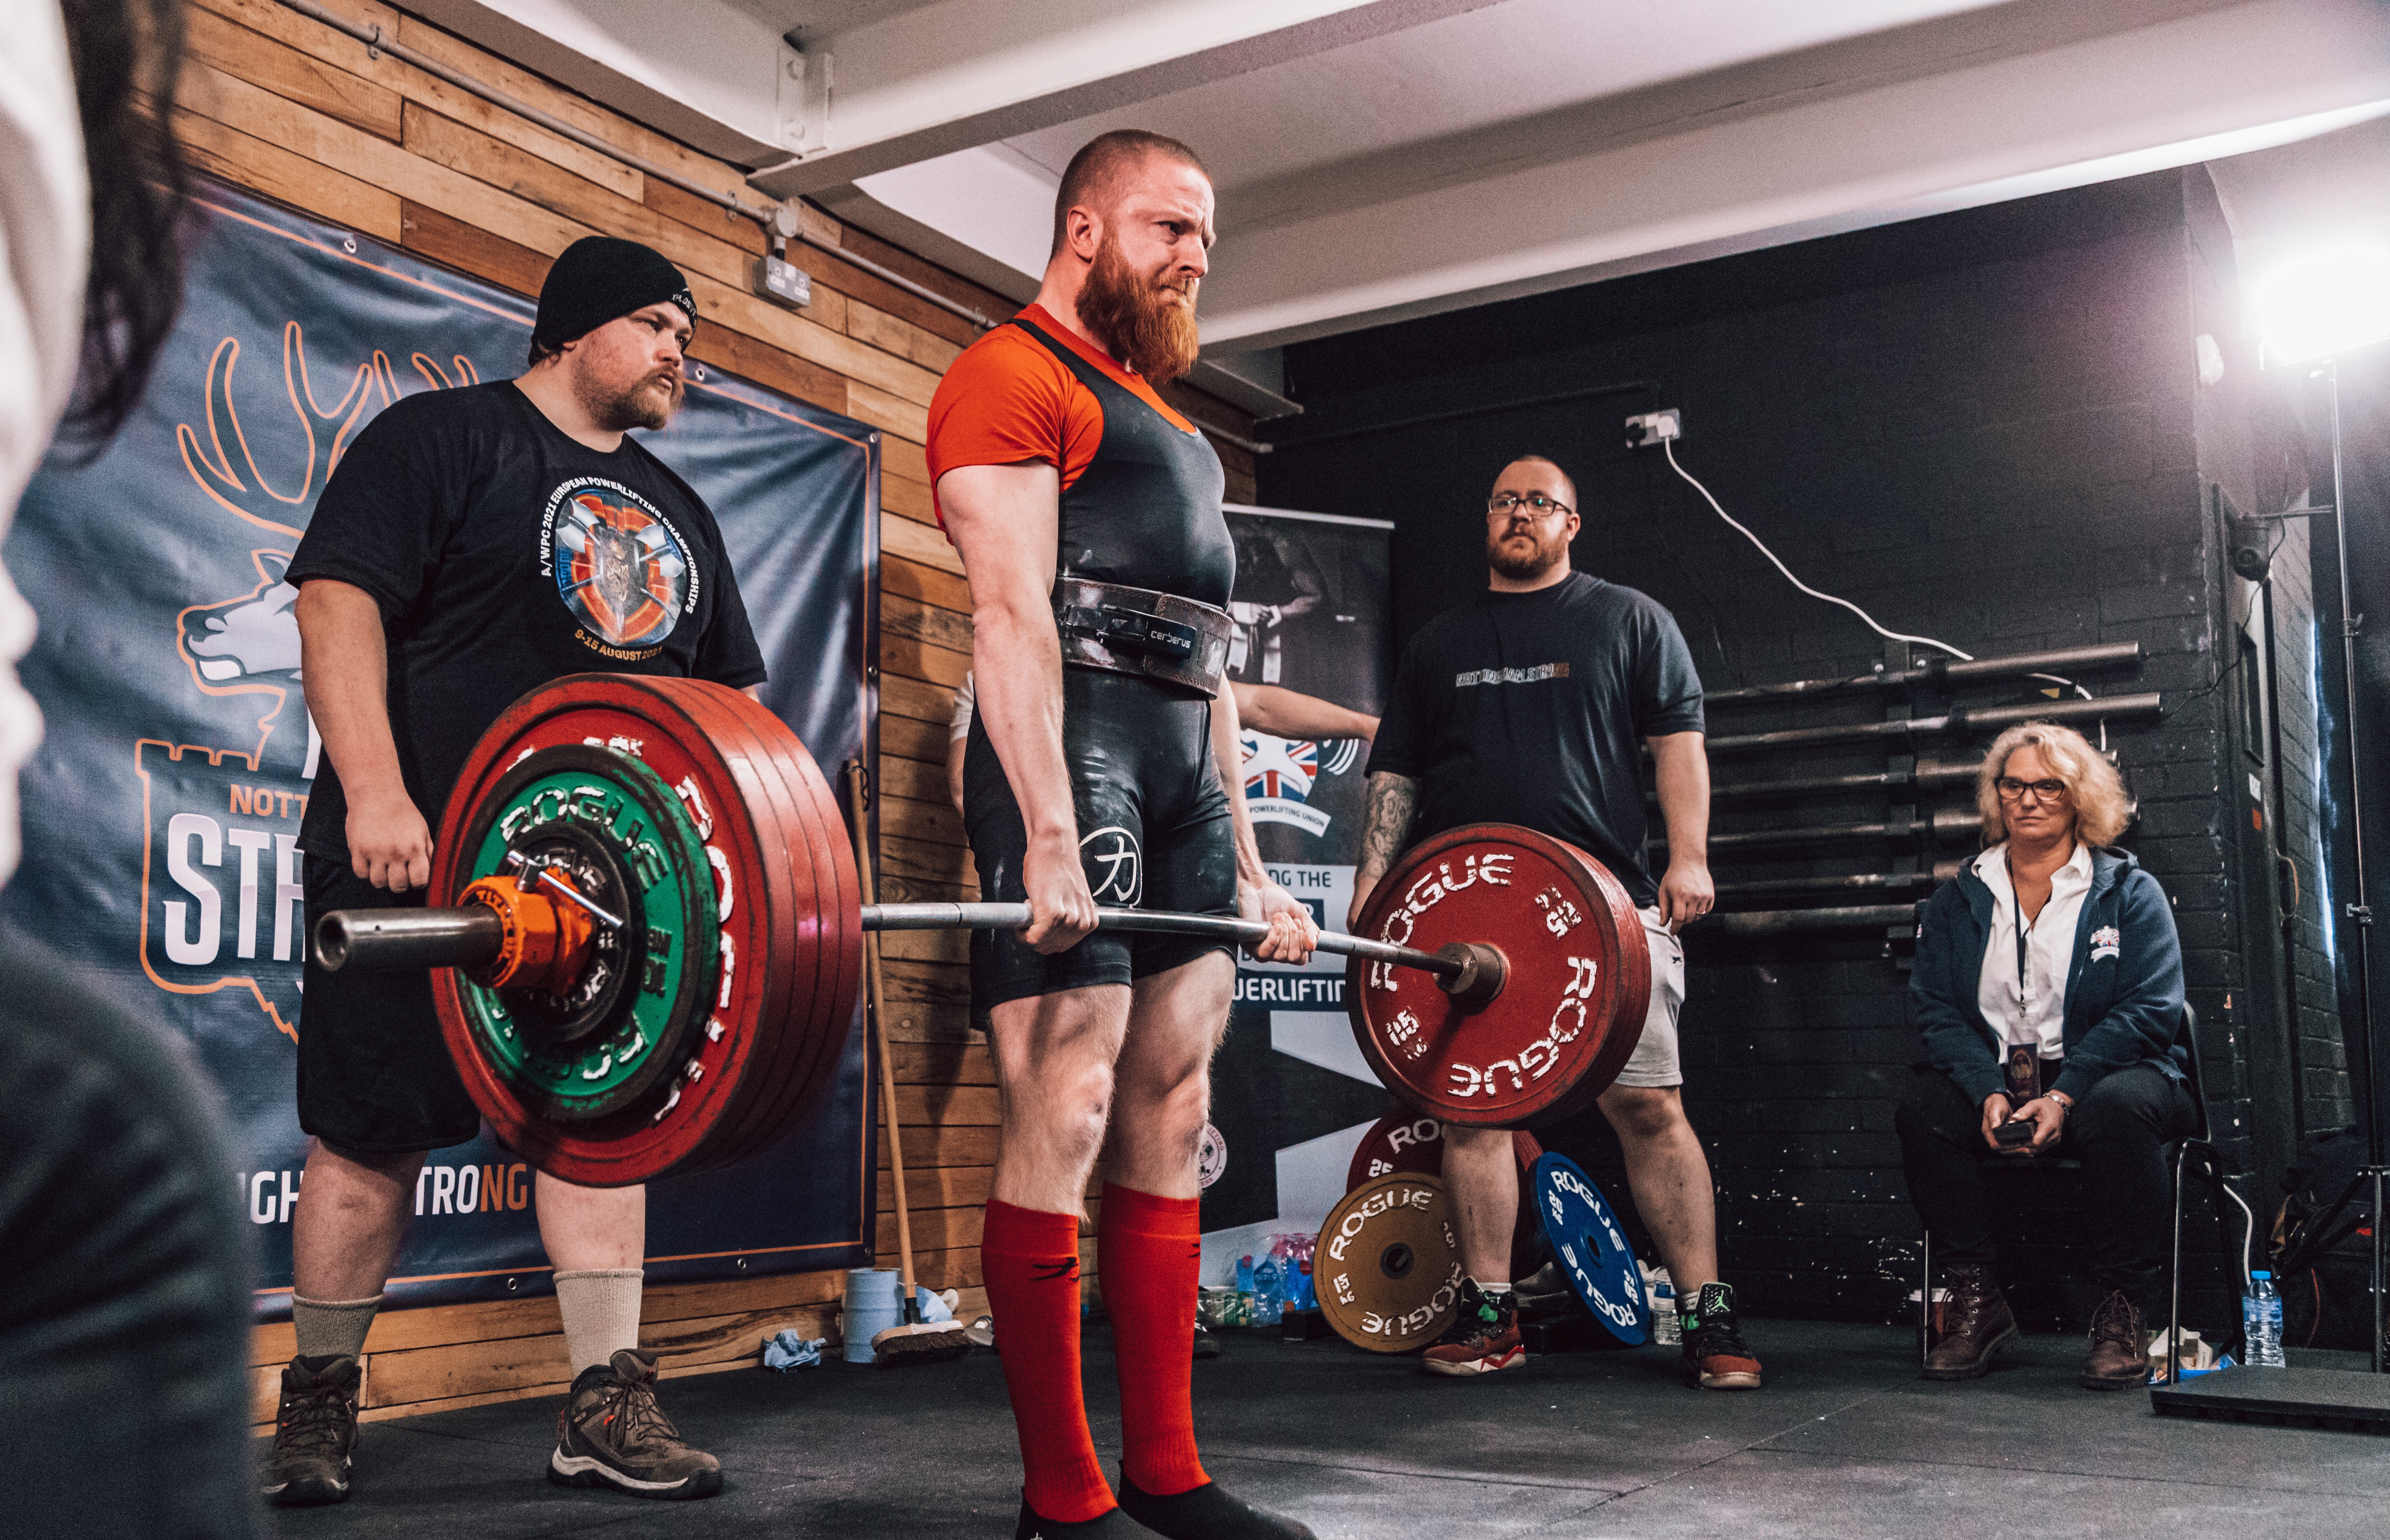 Martin Wilson, taking part in powerlifting competition. Photograph courtesy of Shots Like Sumo